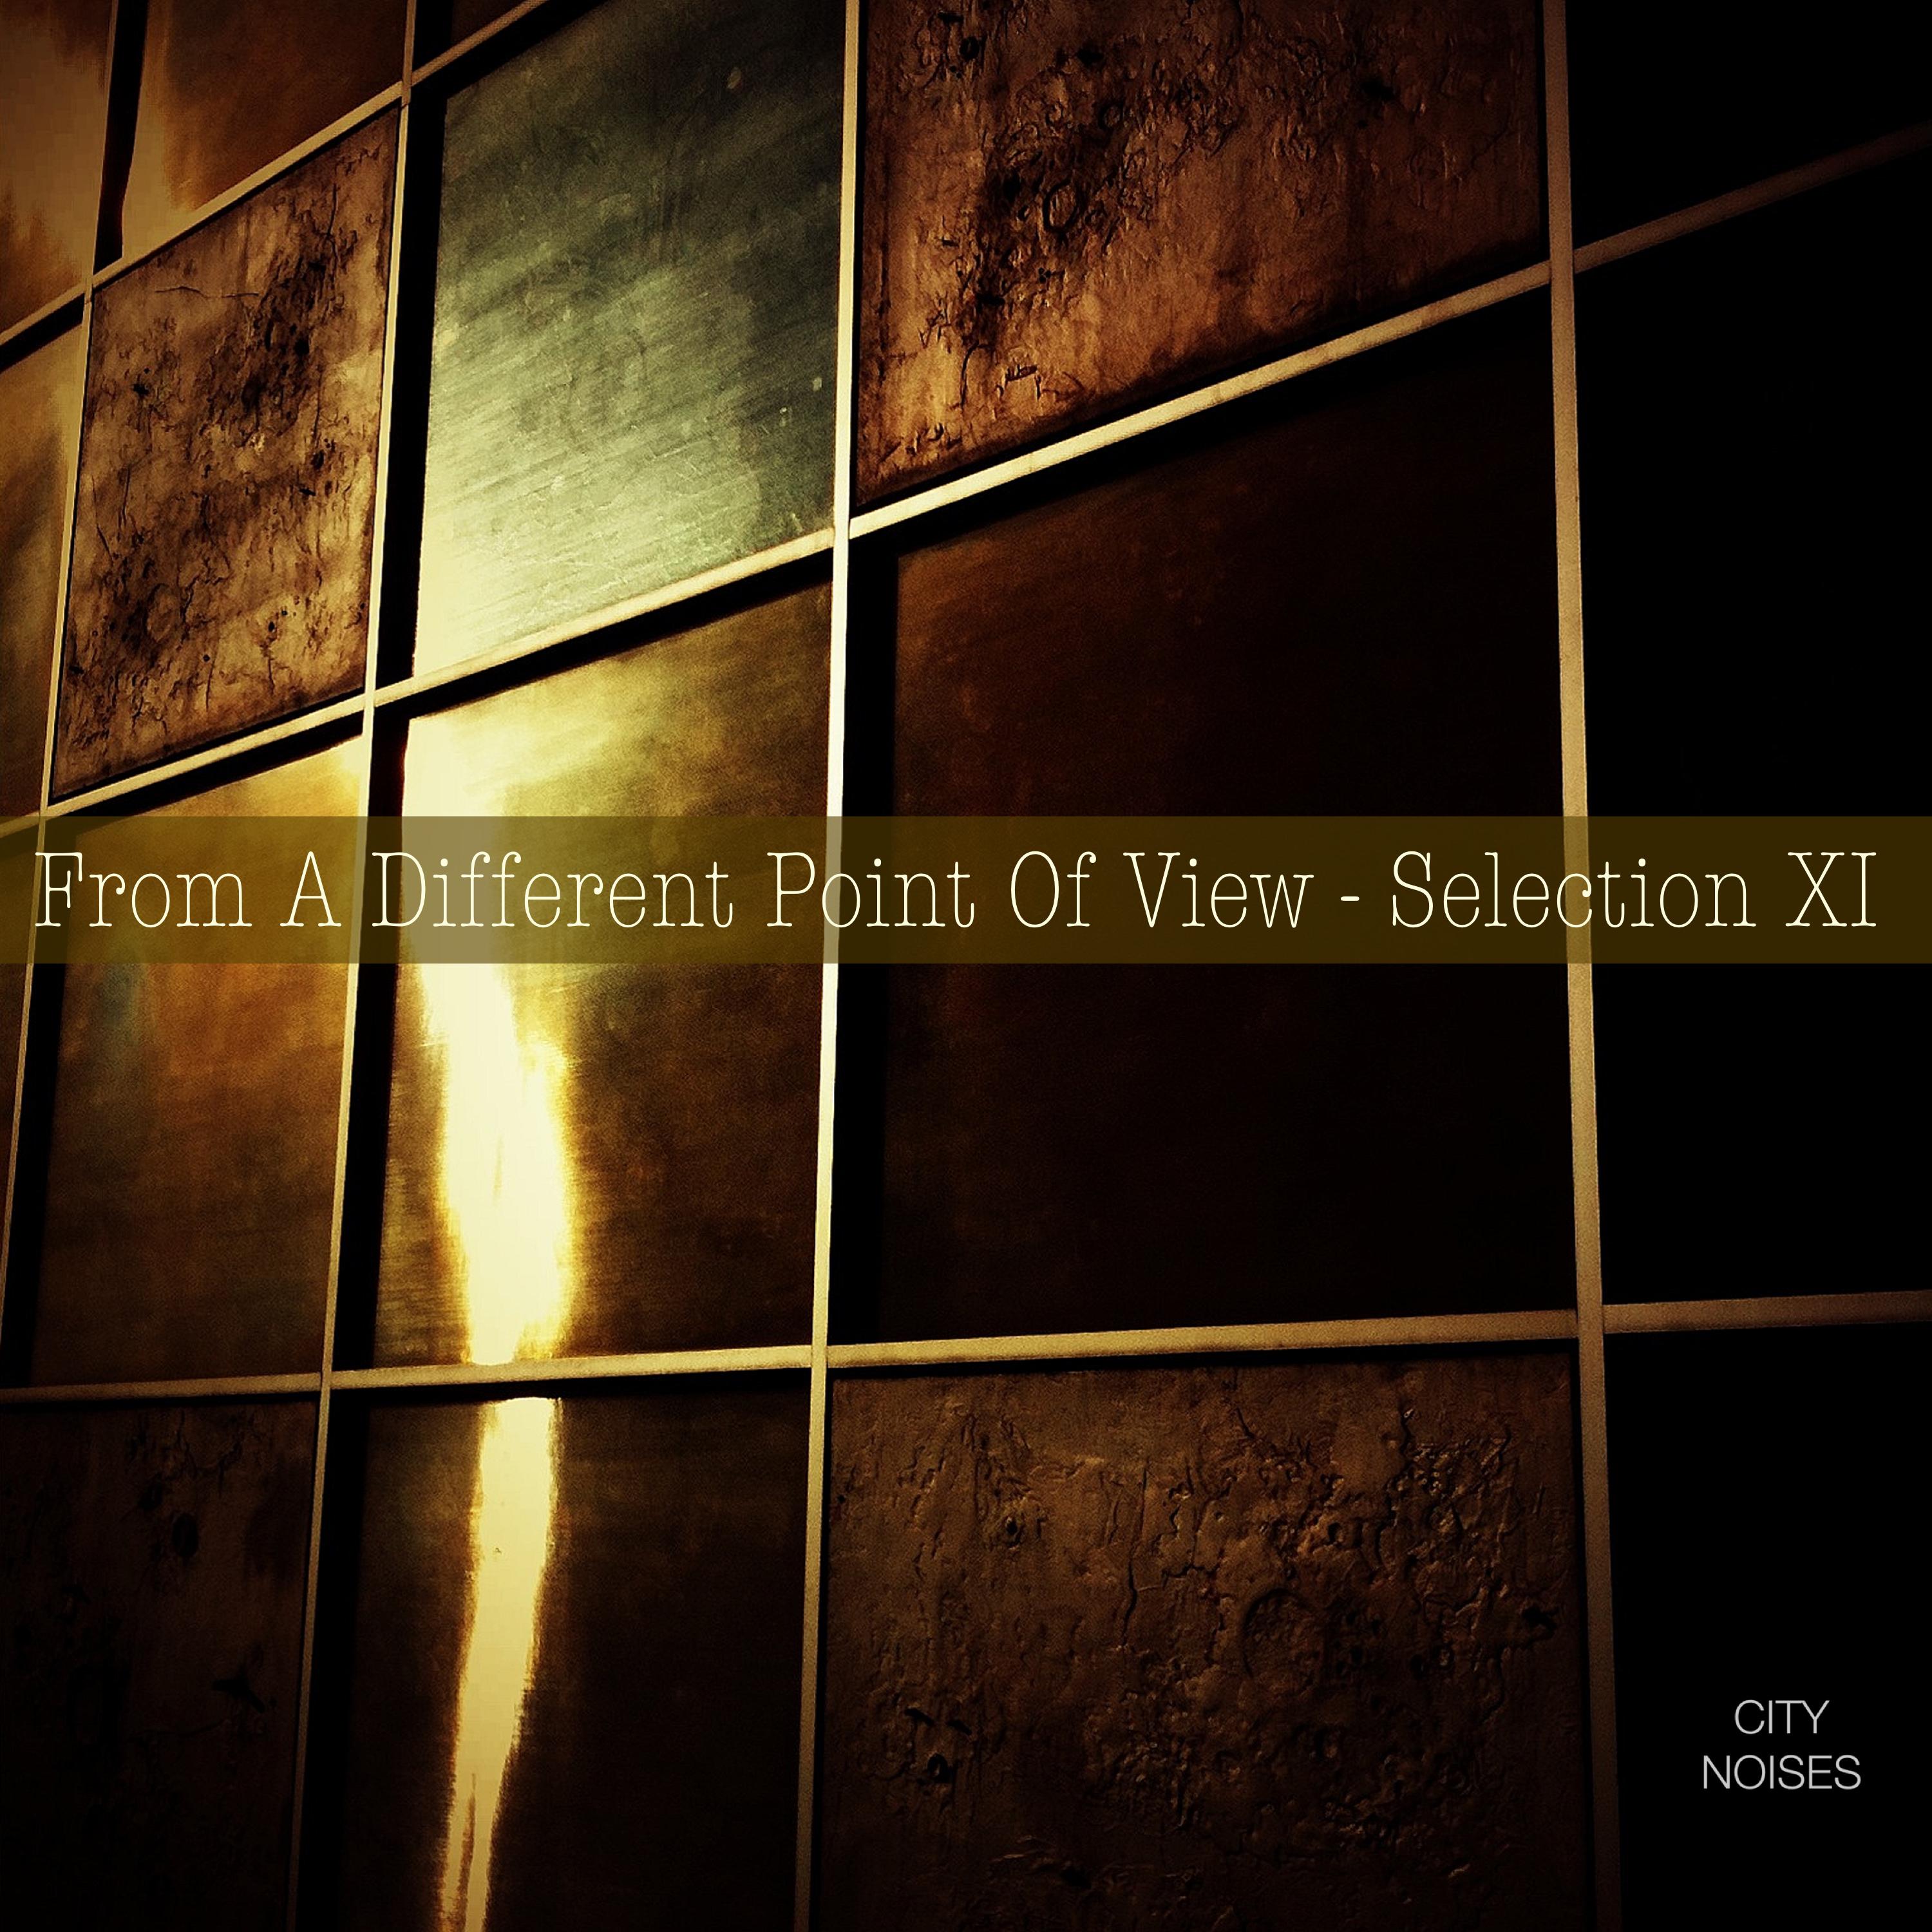 From a Different Point of View - Selection XI